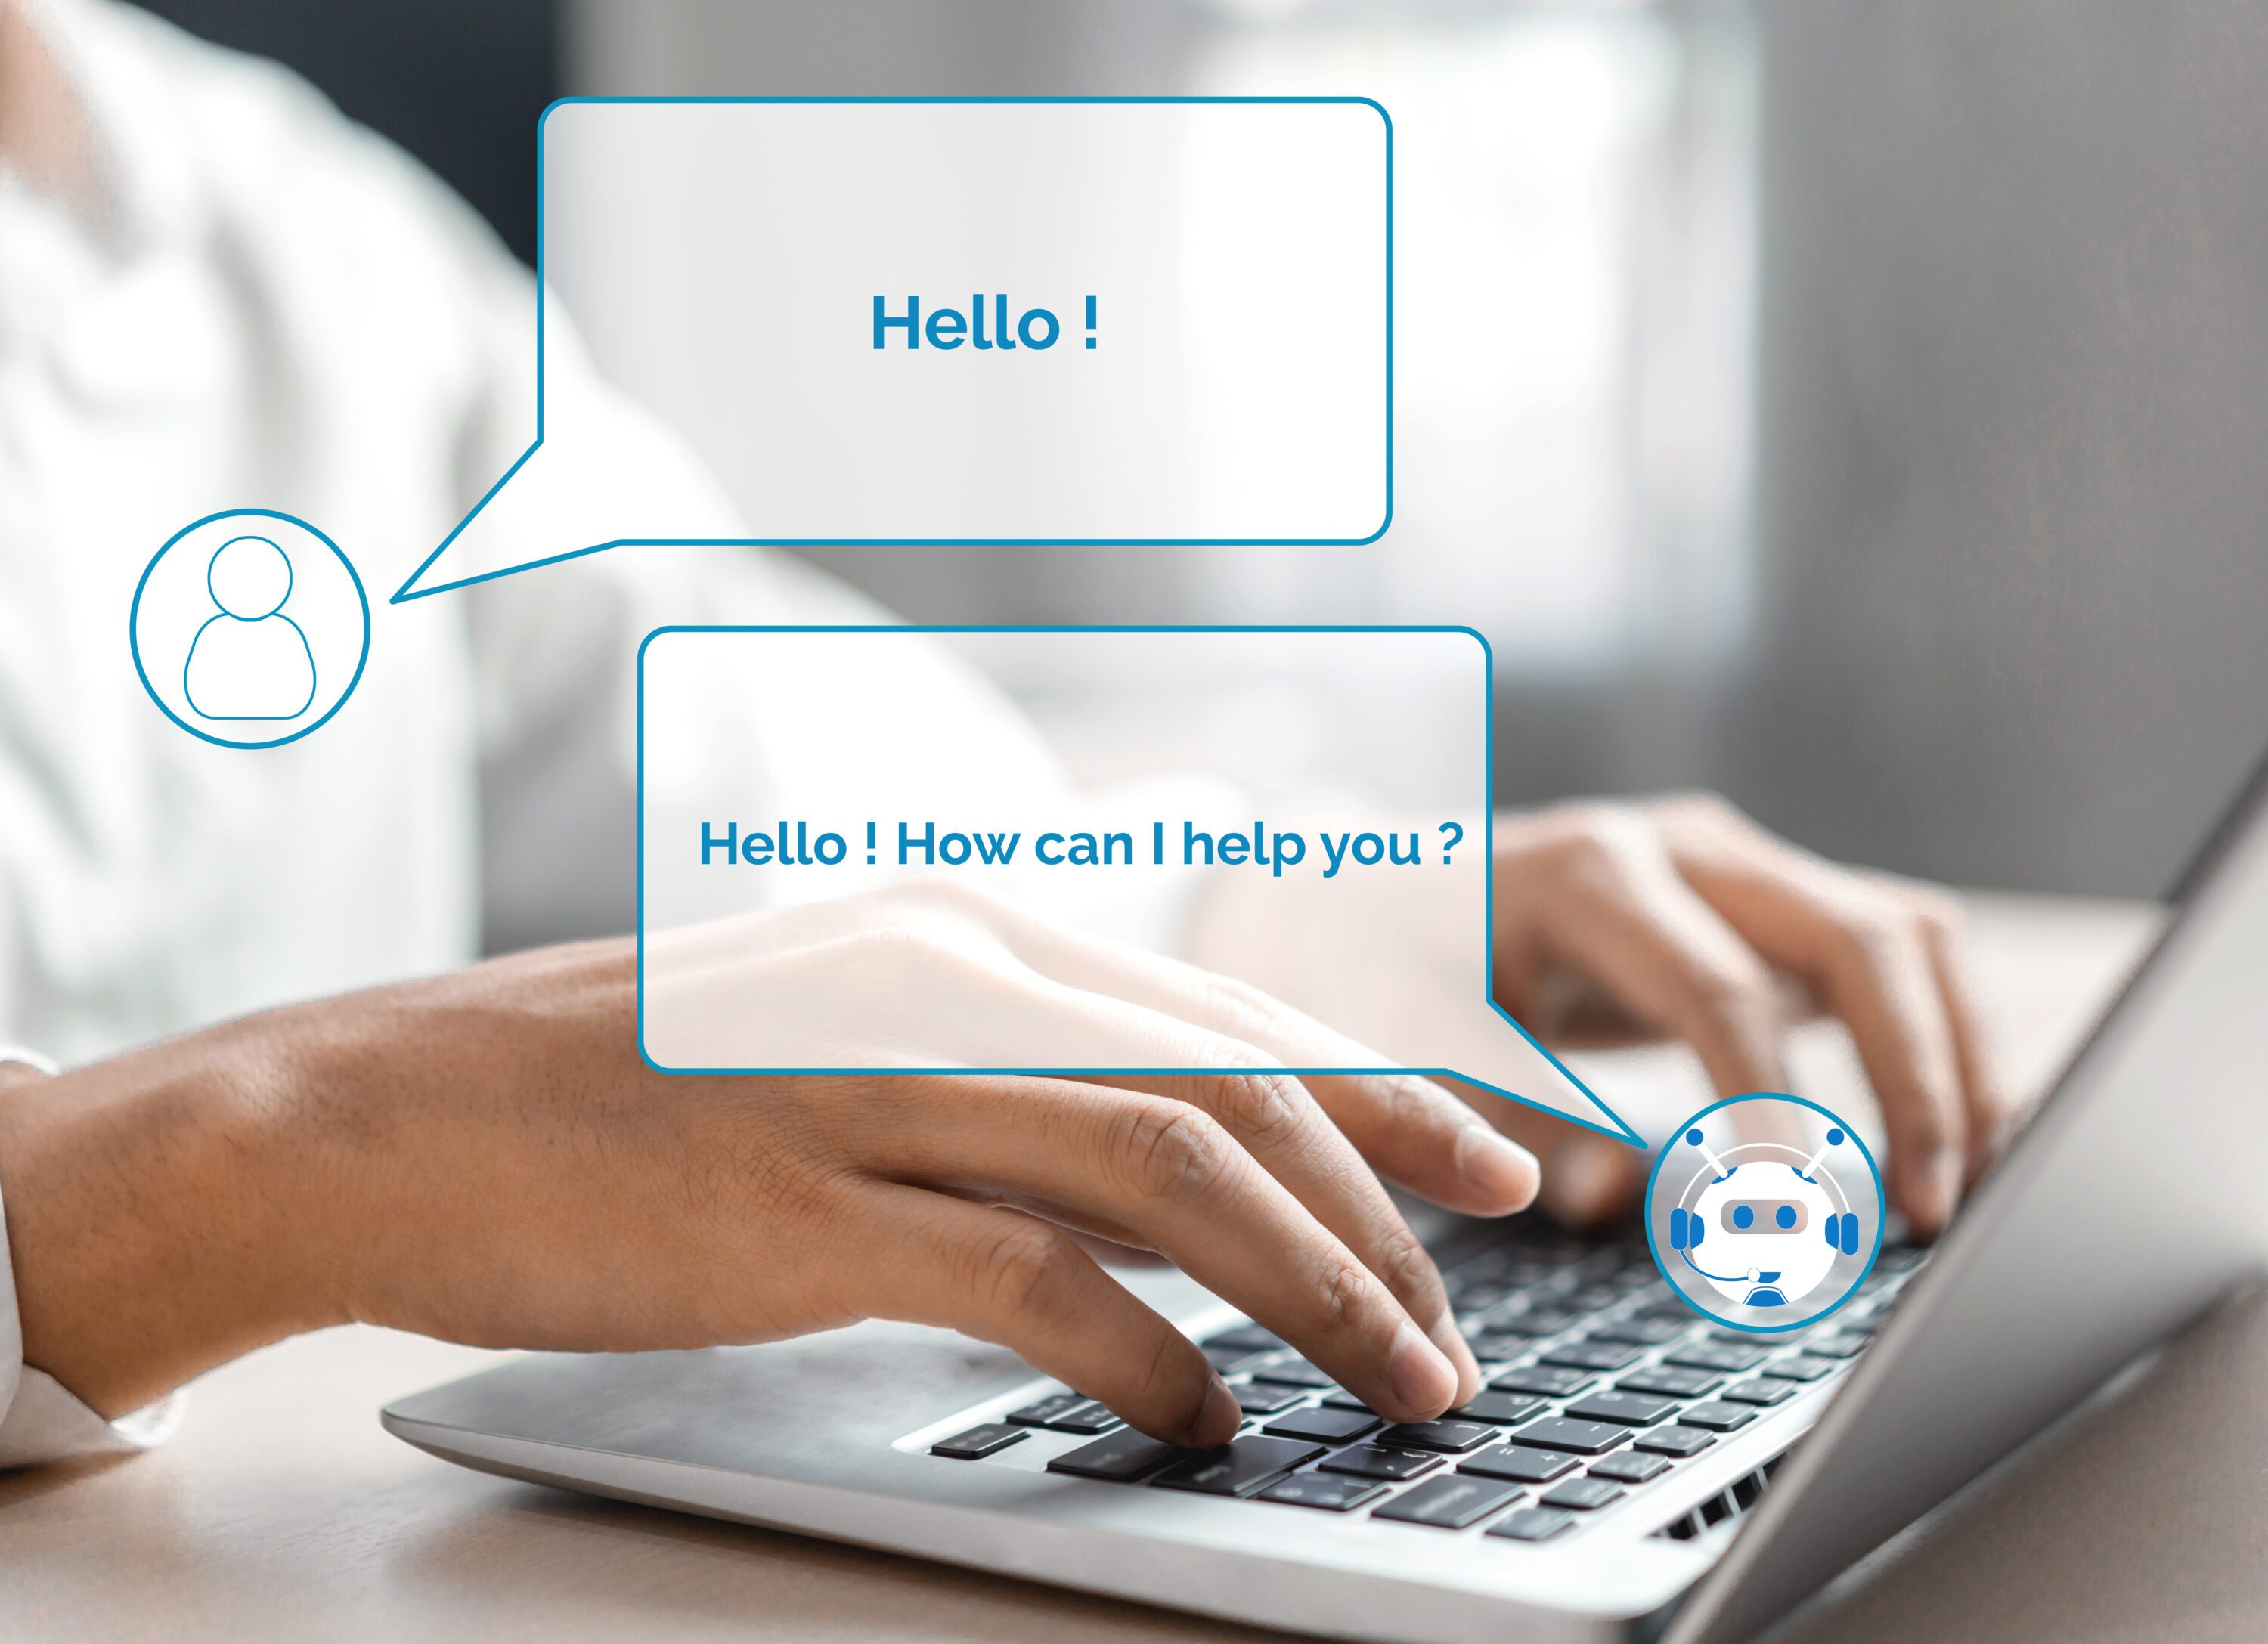 A man's hands are typing on a laptop with an AI Chatbot. Speech bubbles say: Hello! and Hello! How can I help you?